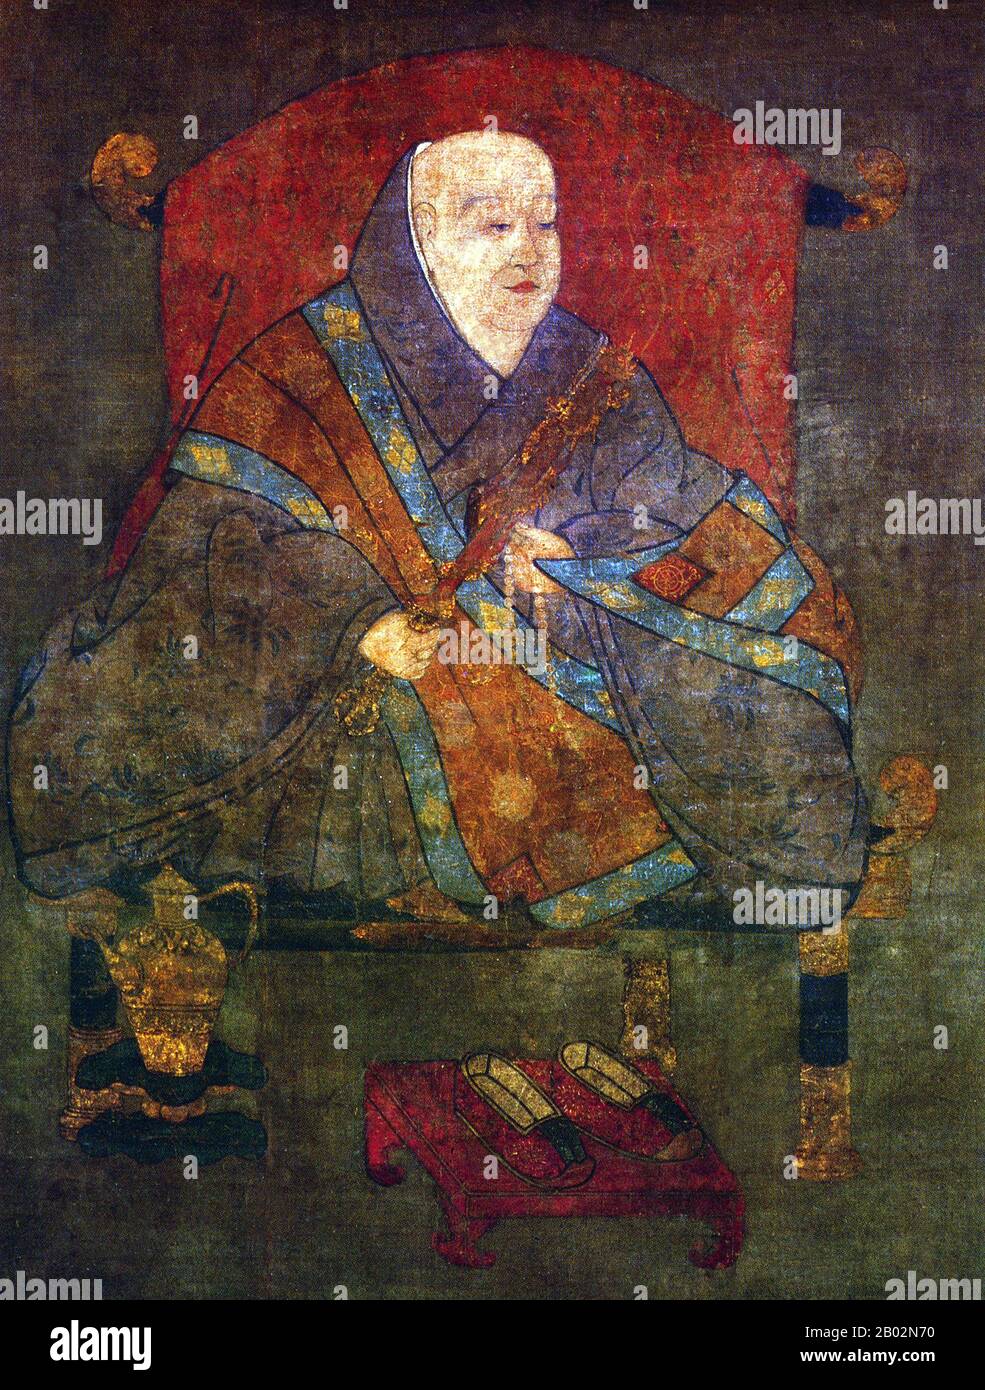 Emperor Uda (宇多天皇 Uda-tennō, May 5, 867 – July 19, 931) was the 59th emperor of Japan, according to the traditional order of succession. Uda's reign spanned the years from 887 through 897.  Before his ascension to the Chrysanthemum Throne, his personal name was Sadami (定省) or Chōjiin-tei.  Emperor Uda was the third son of Emperor Kōkō. His mother was Empress Dowager Hanshi, a daughter of Prince Nakano (who was himself a son of Emperor Kammu). Uda had five Imperial consorts and 20 Imperial children. Stock Photo